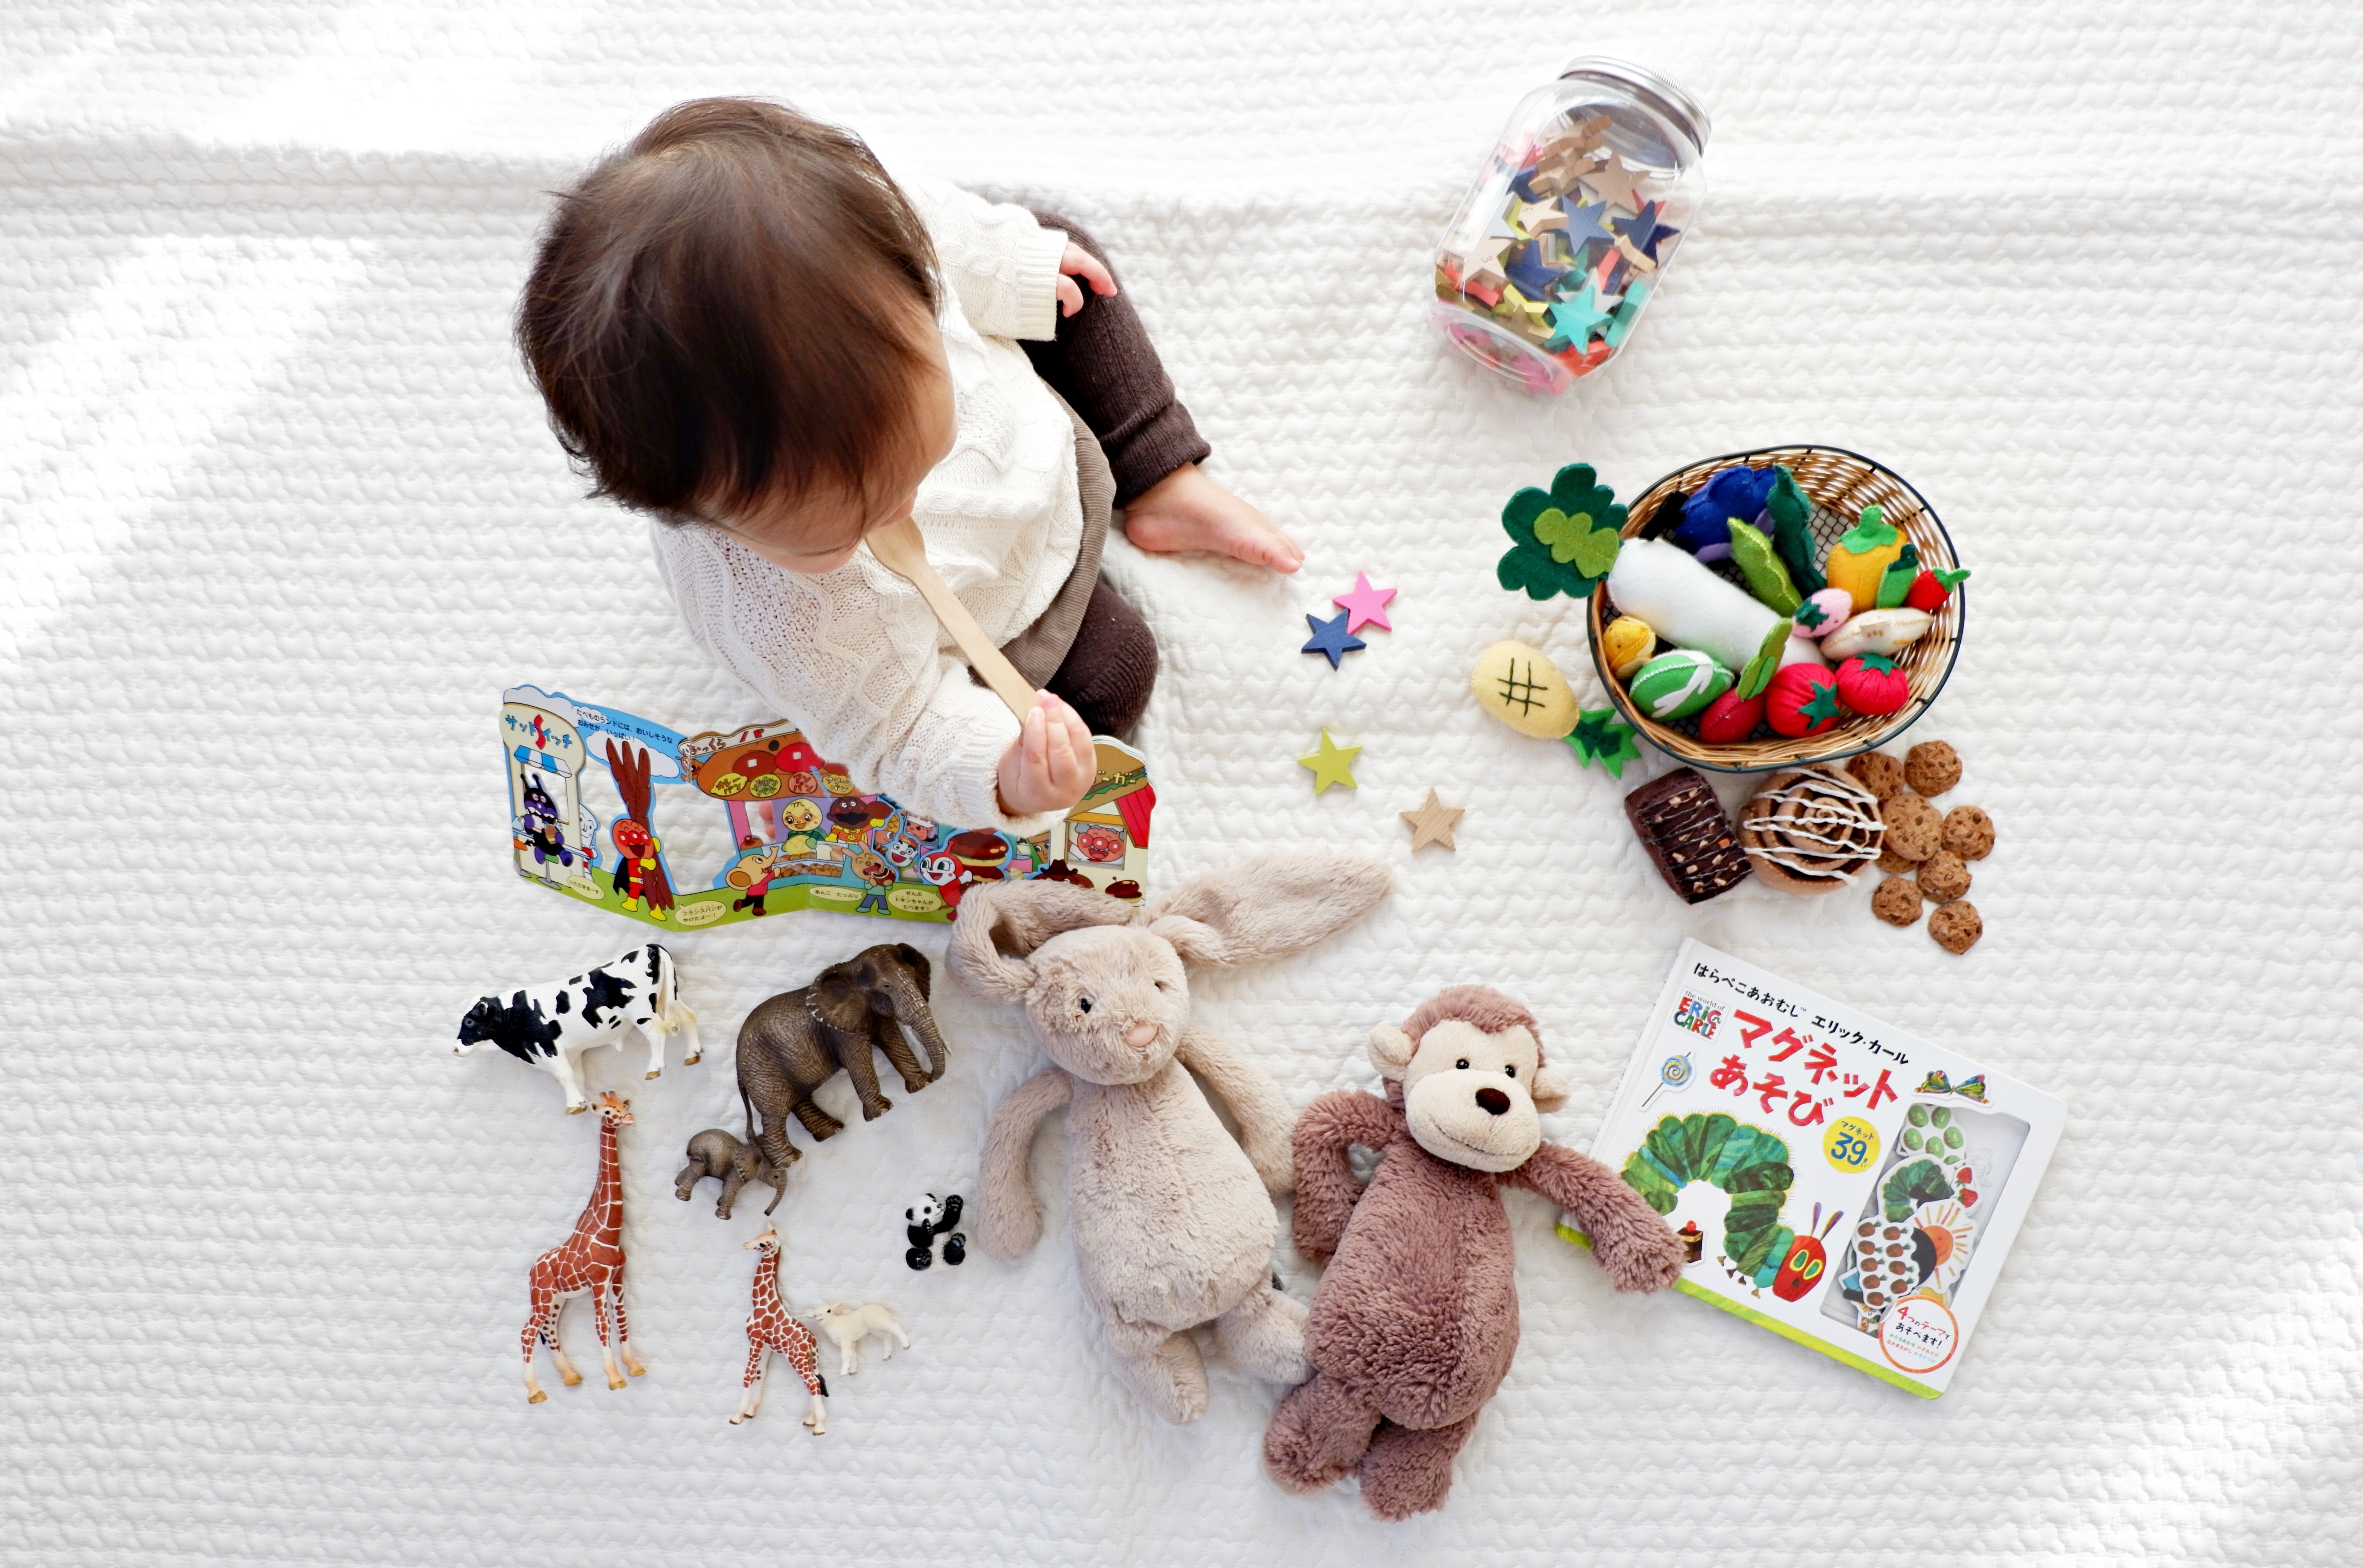 Creating a thoughtful play space for your child.